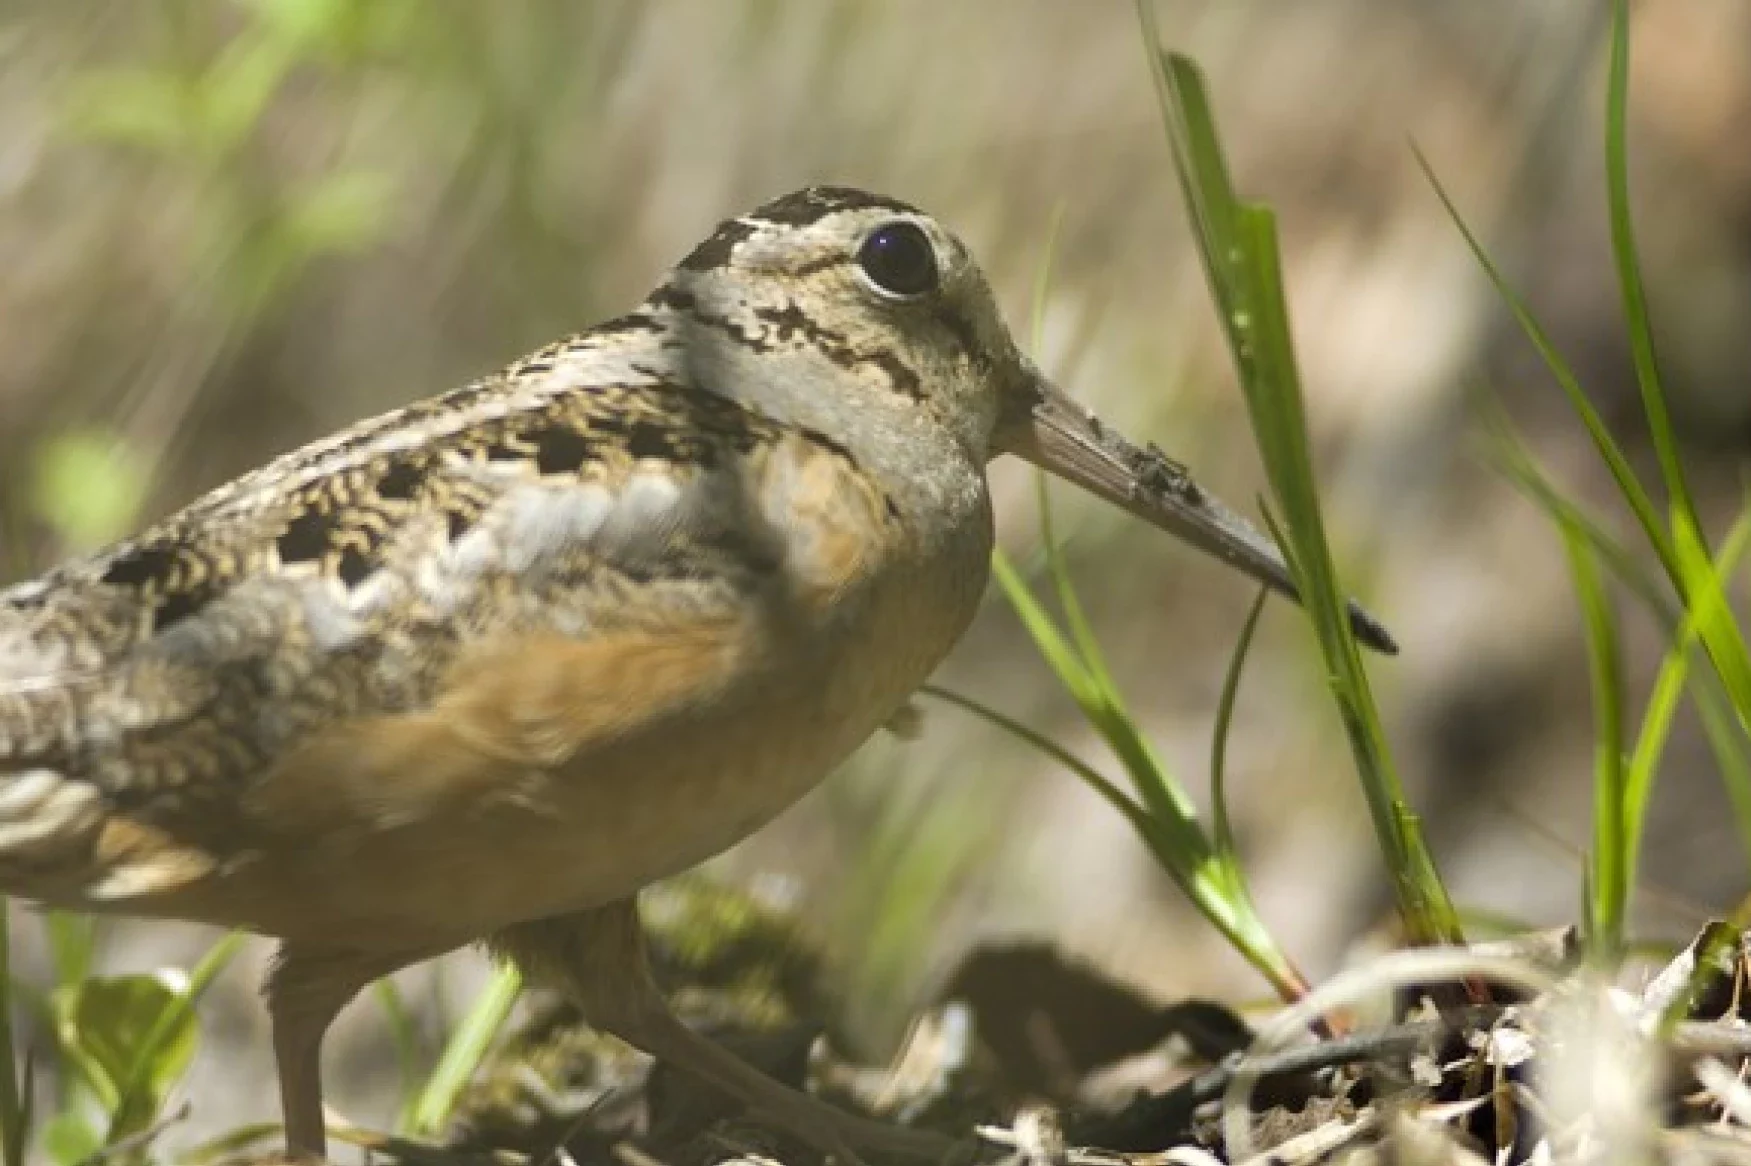 An American woodcock bird on the ground. It has a stumpy body and a long beak.